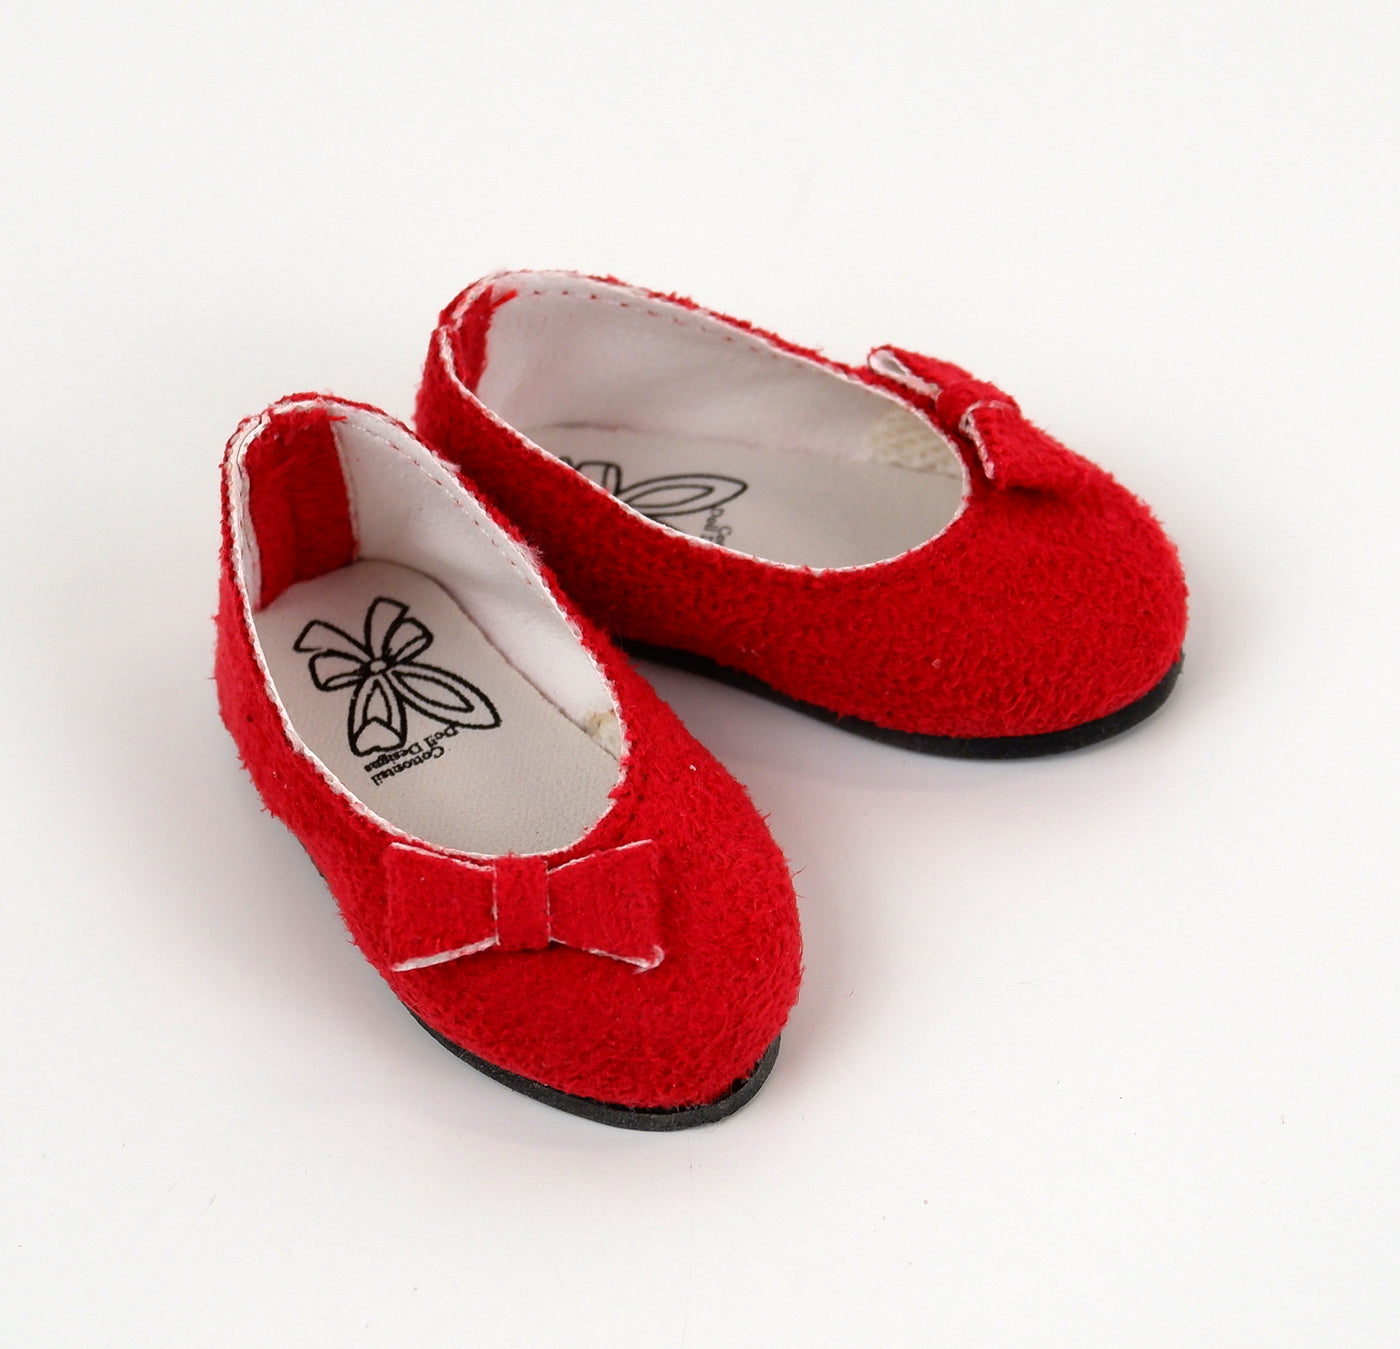 Bow Toe Ballet Flats - Suede Lipstick Red